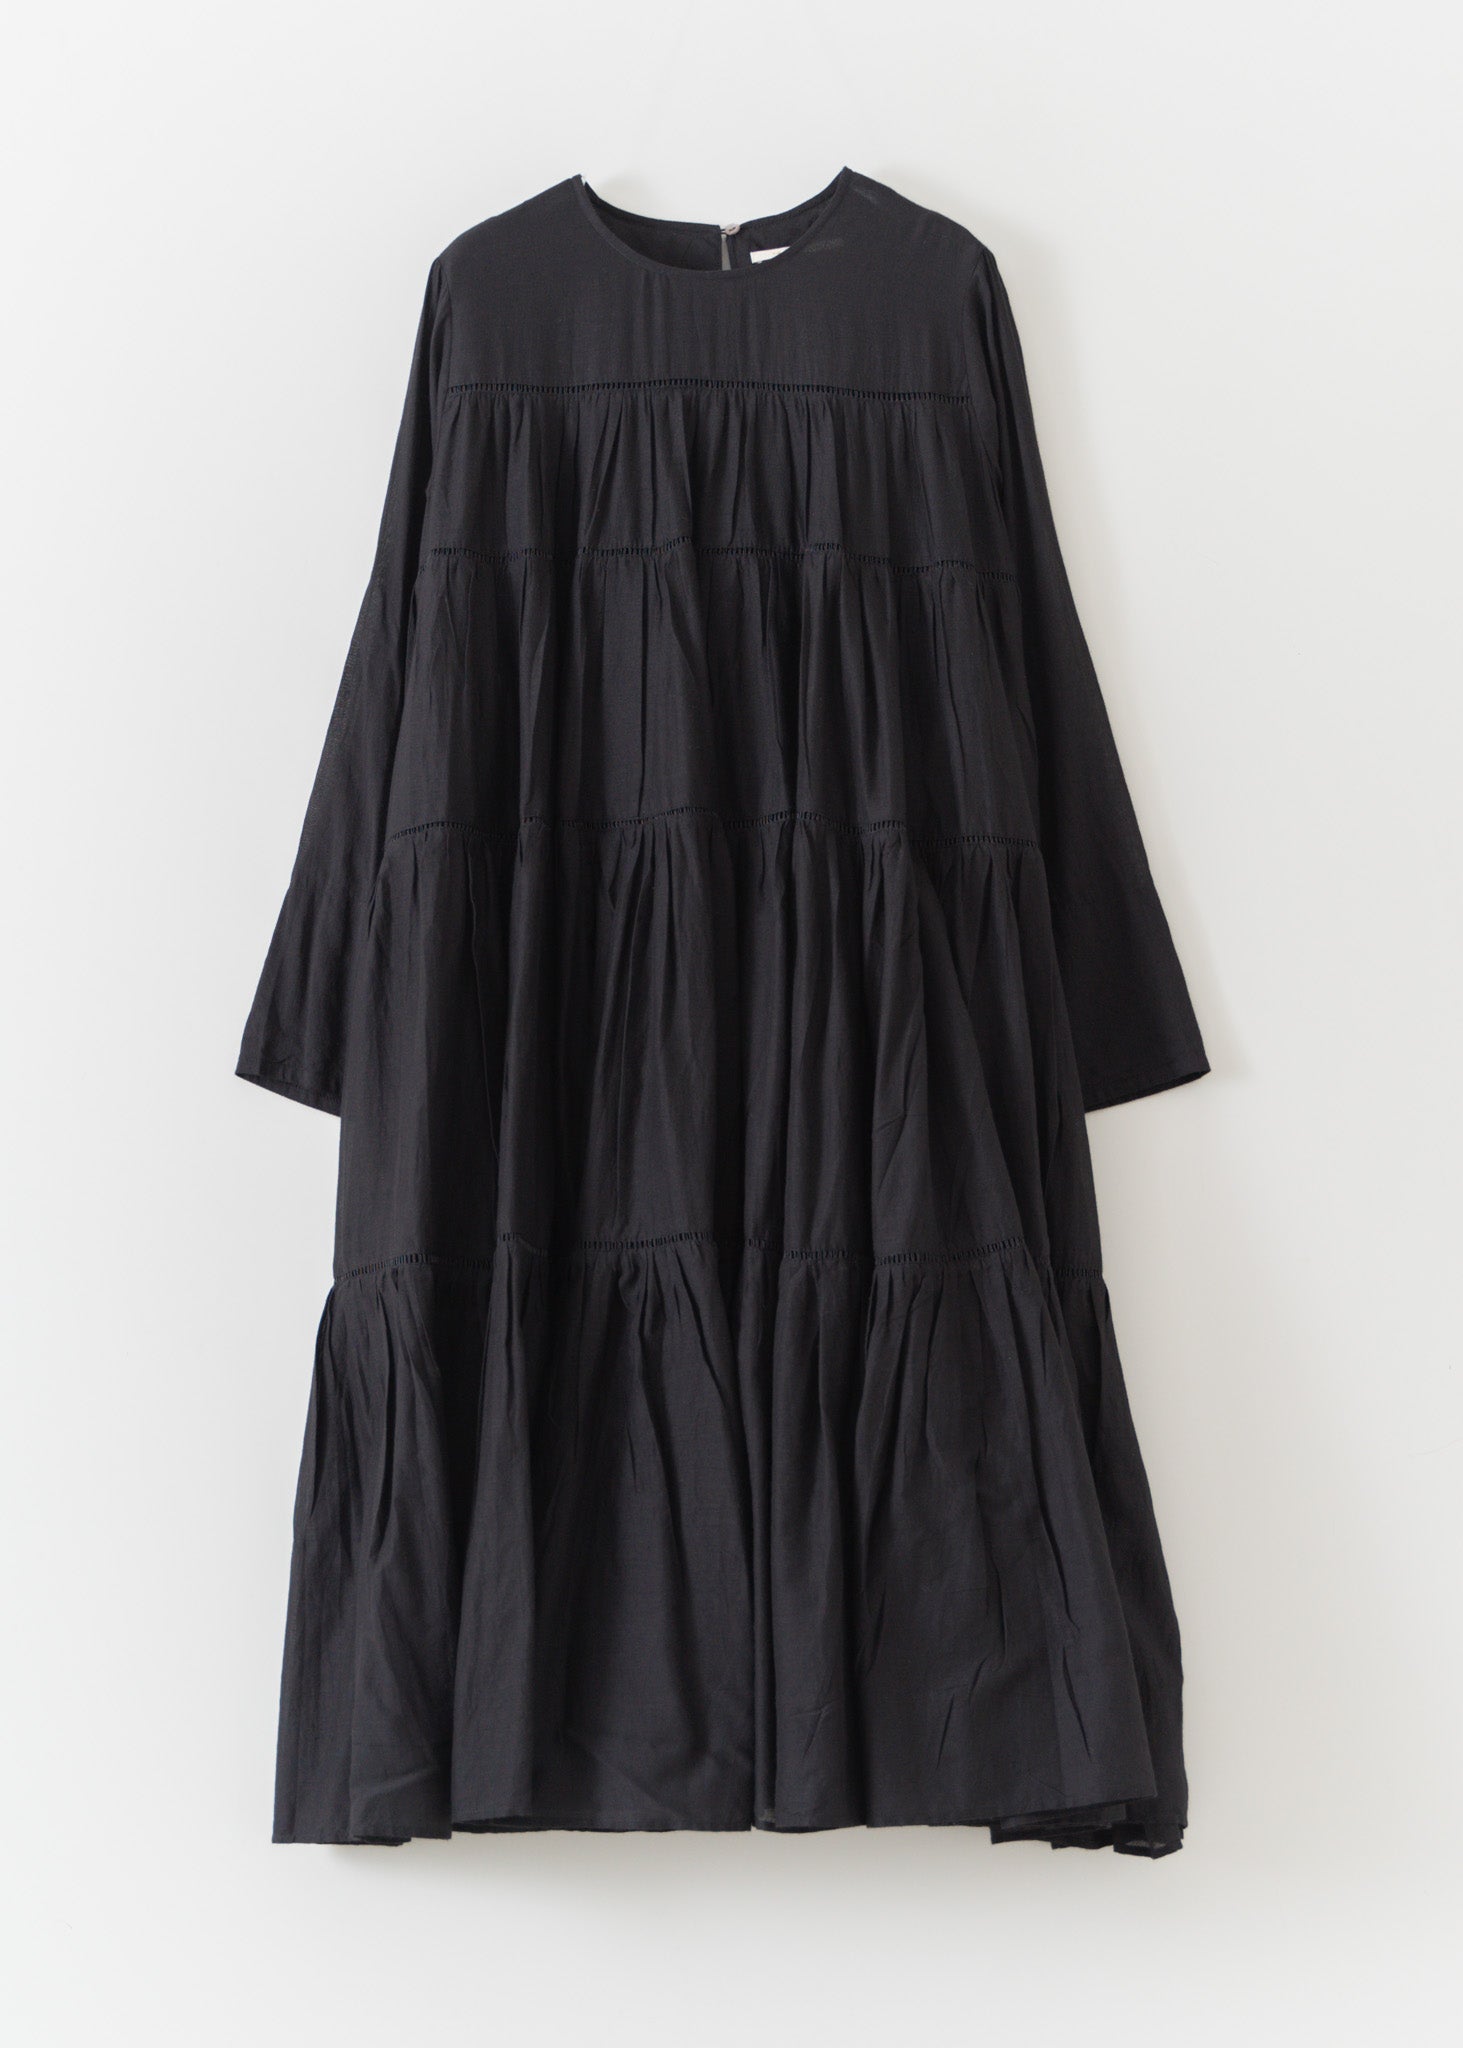 Cotton Voile Tiered Middle Length Dress Black